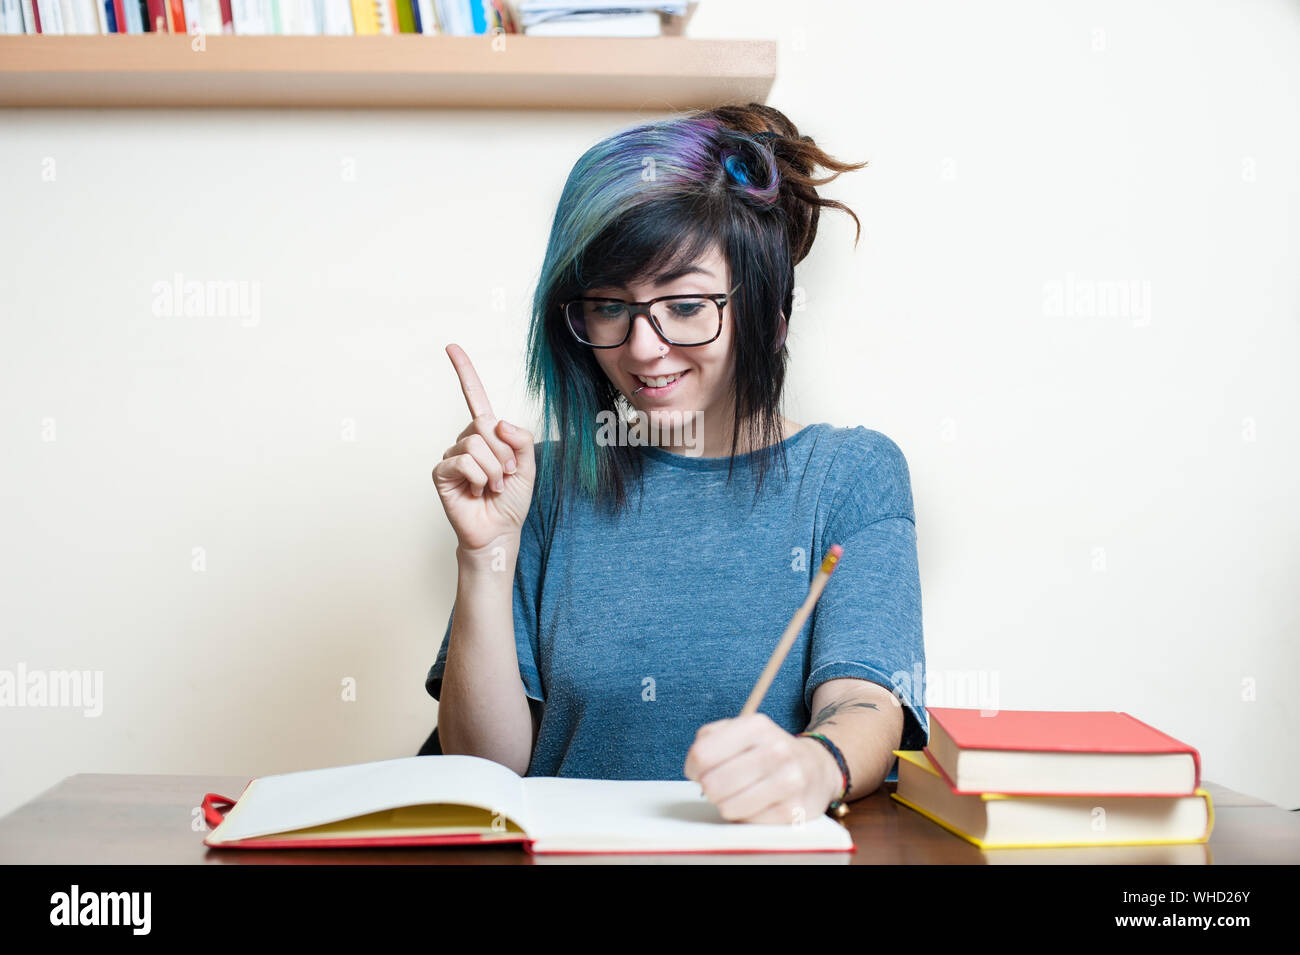 Young Student Finding Solution While Studying At Home Stock Photo